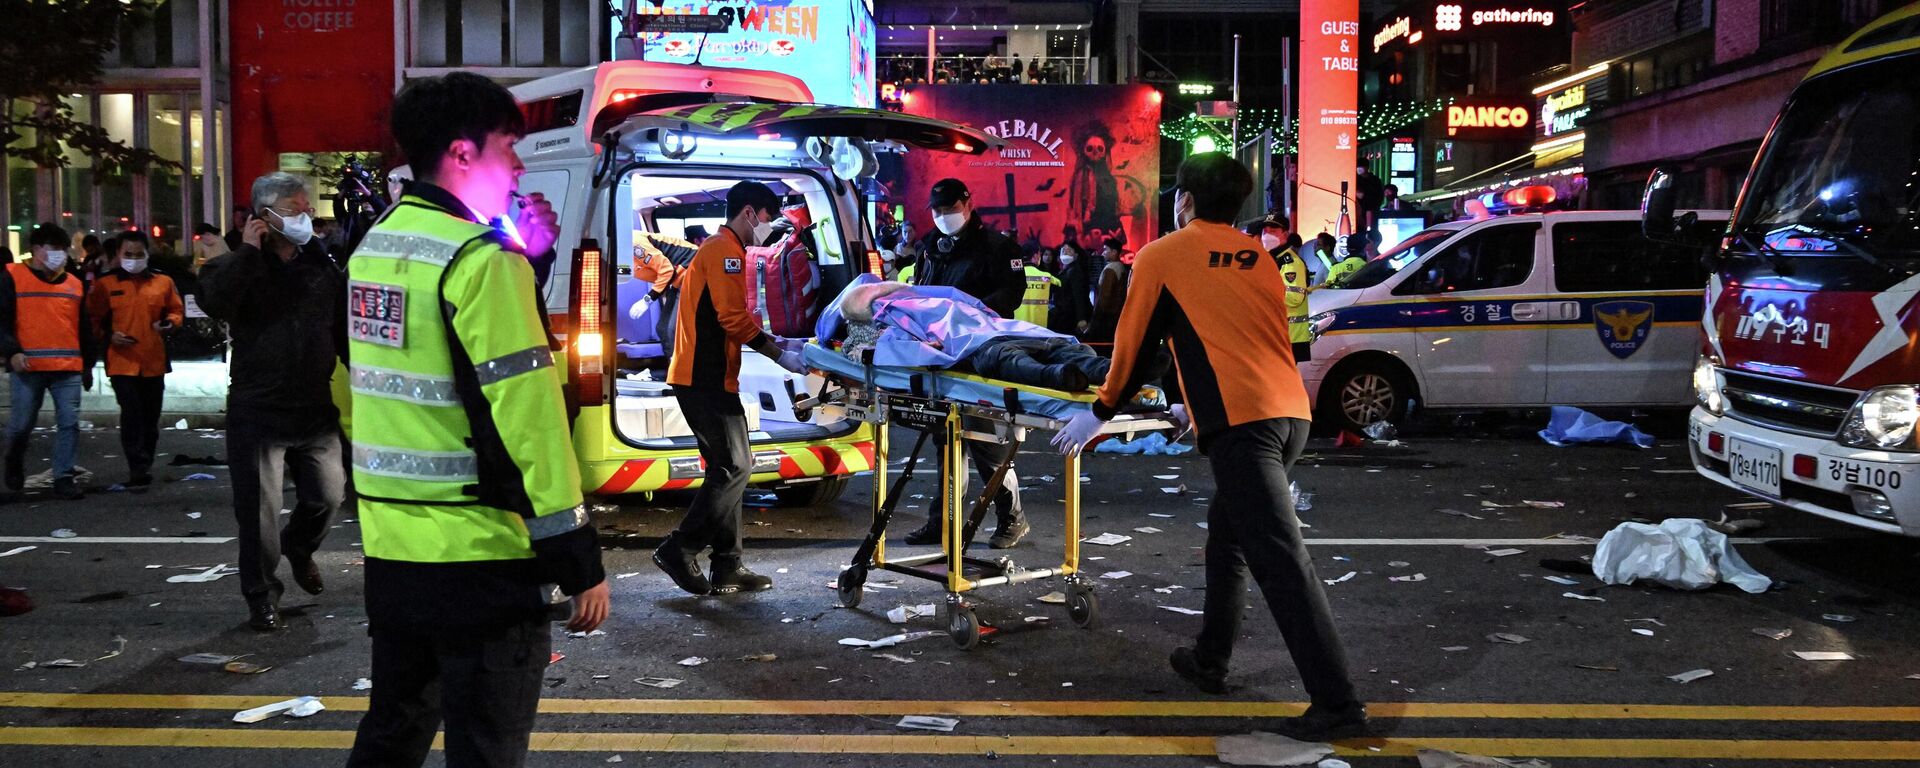 A person, believed to have suffered from cardiac arrest, is transported into an ambulance in the popular nightlife district of Itaewon in Seoul on October 30, 2022. - Sputnik International, 1920, 31.10.2022